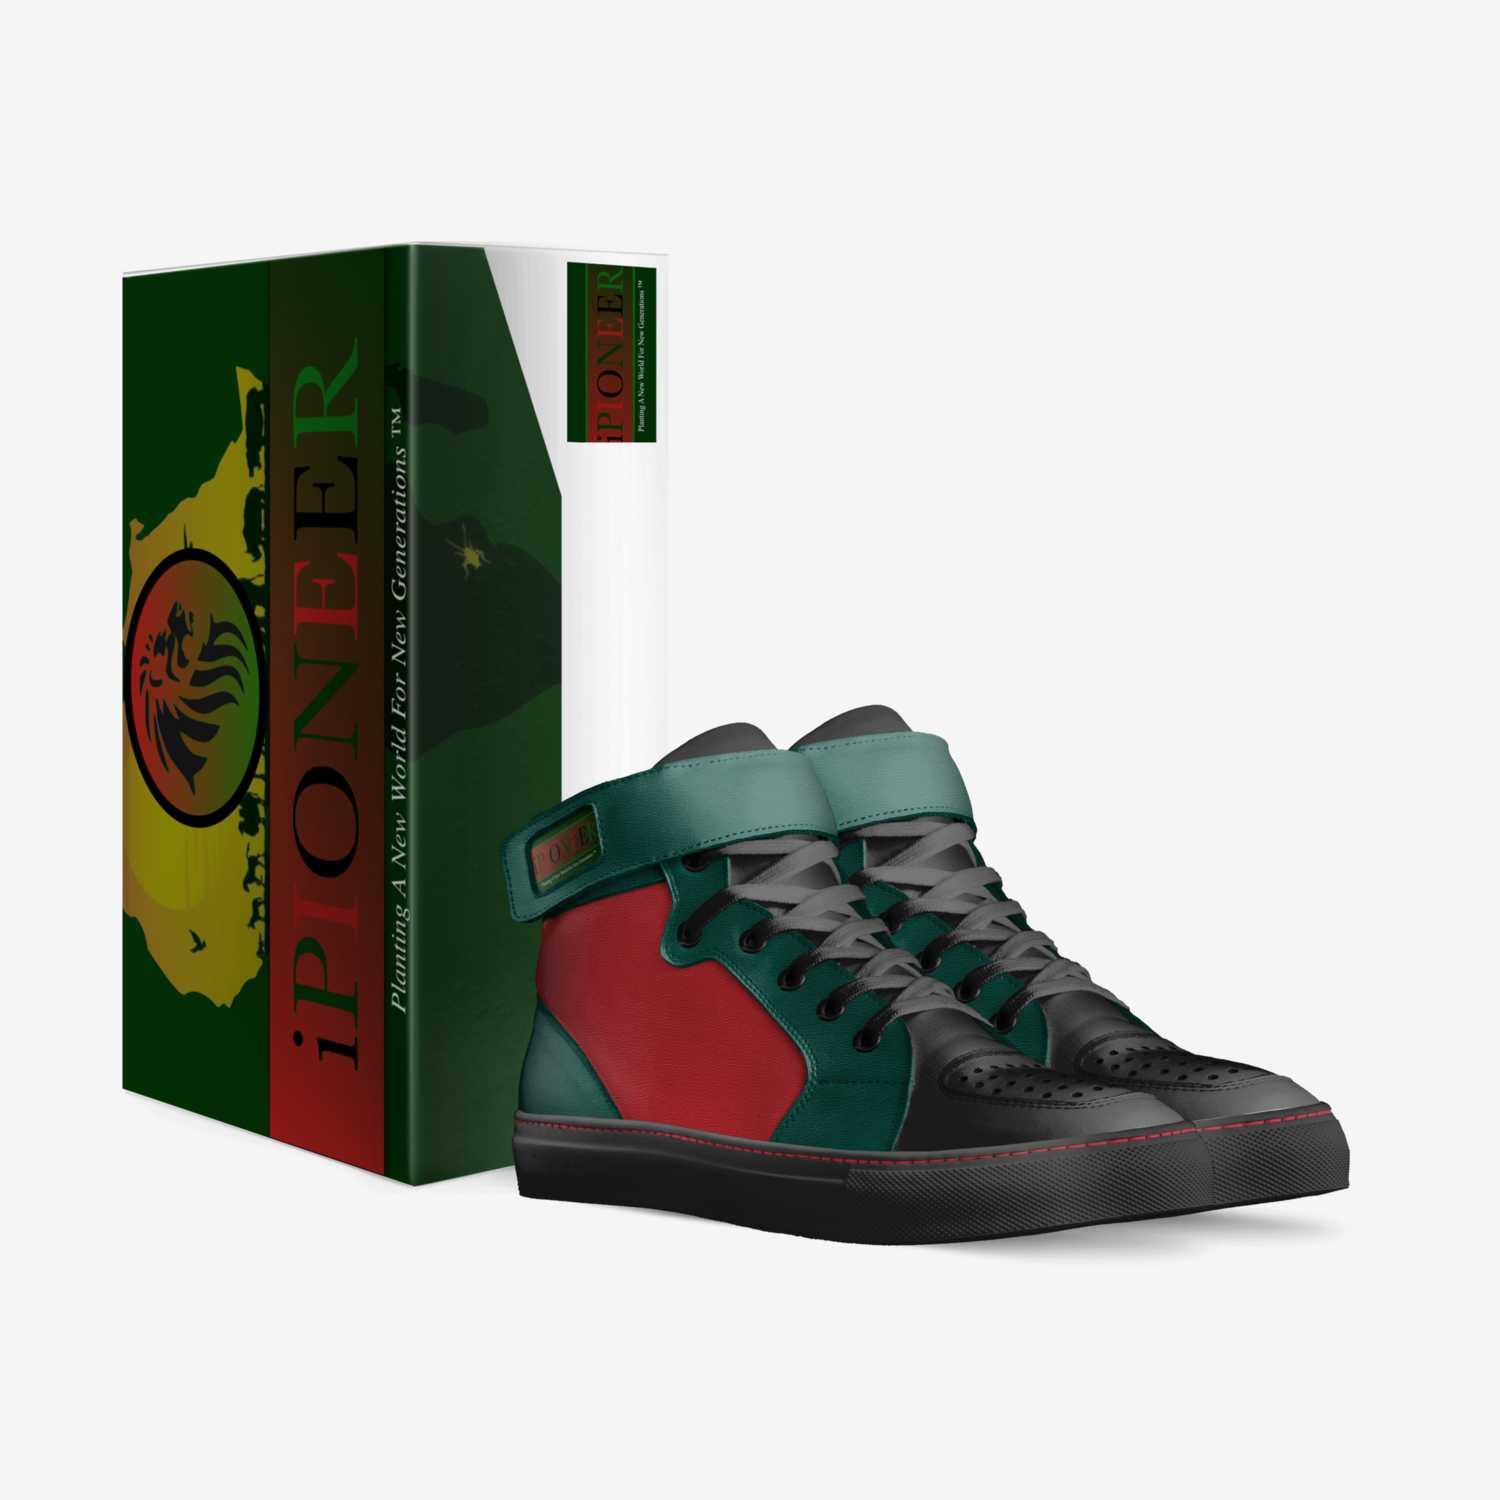 iPioneerAfrica custom made in Italy shoes by Marlon D. Hester Sr. | Box view